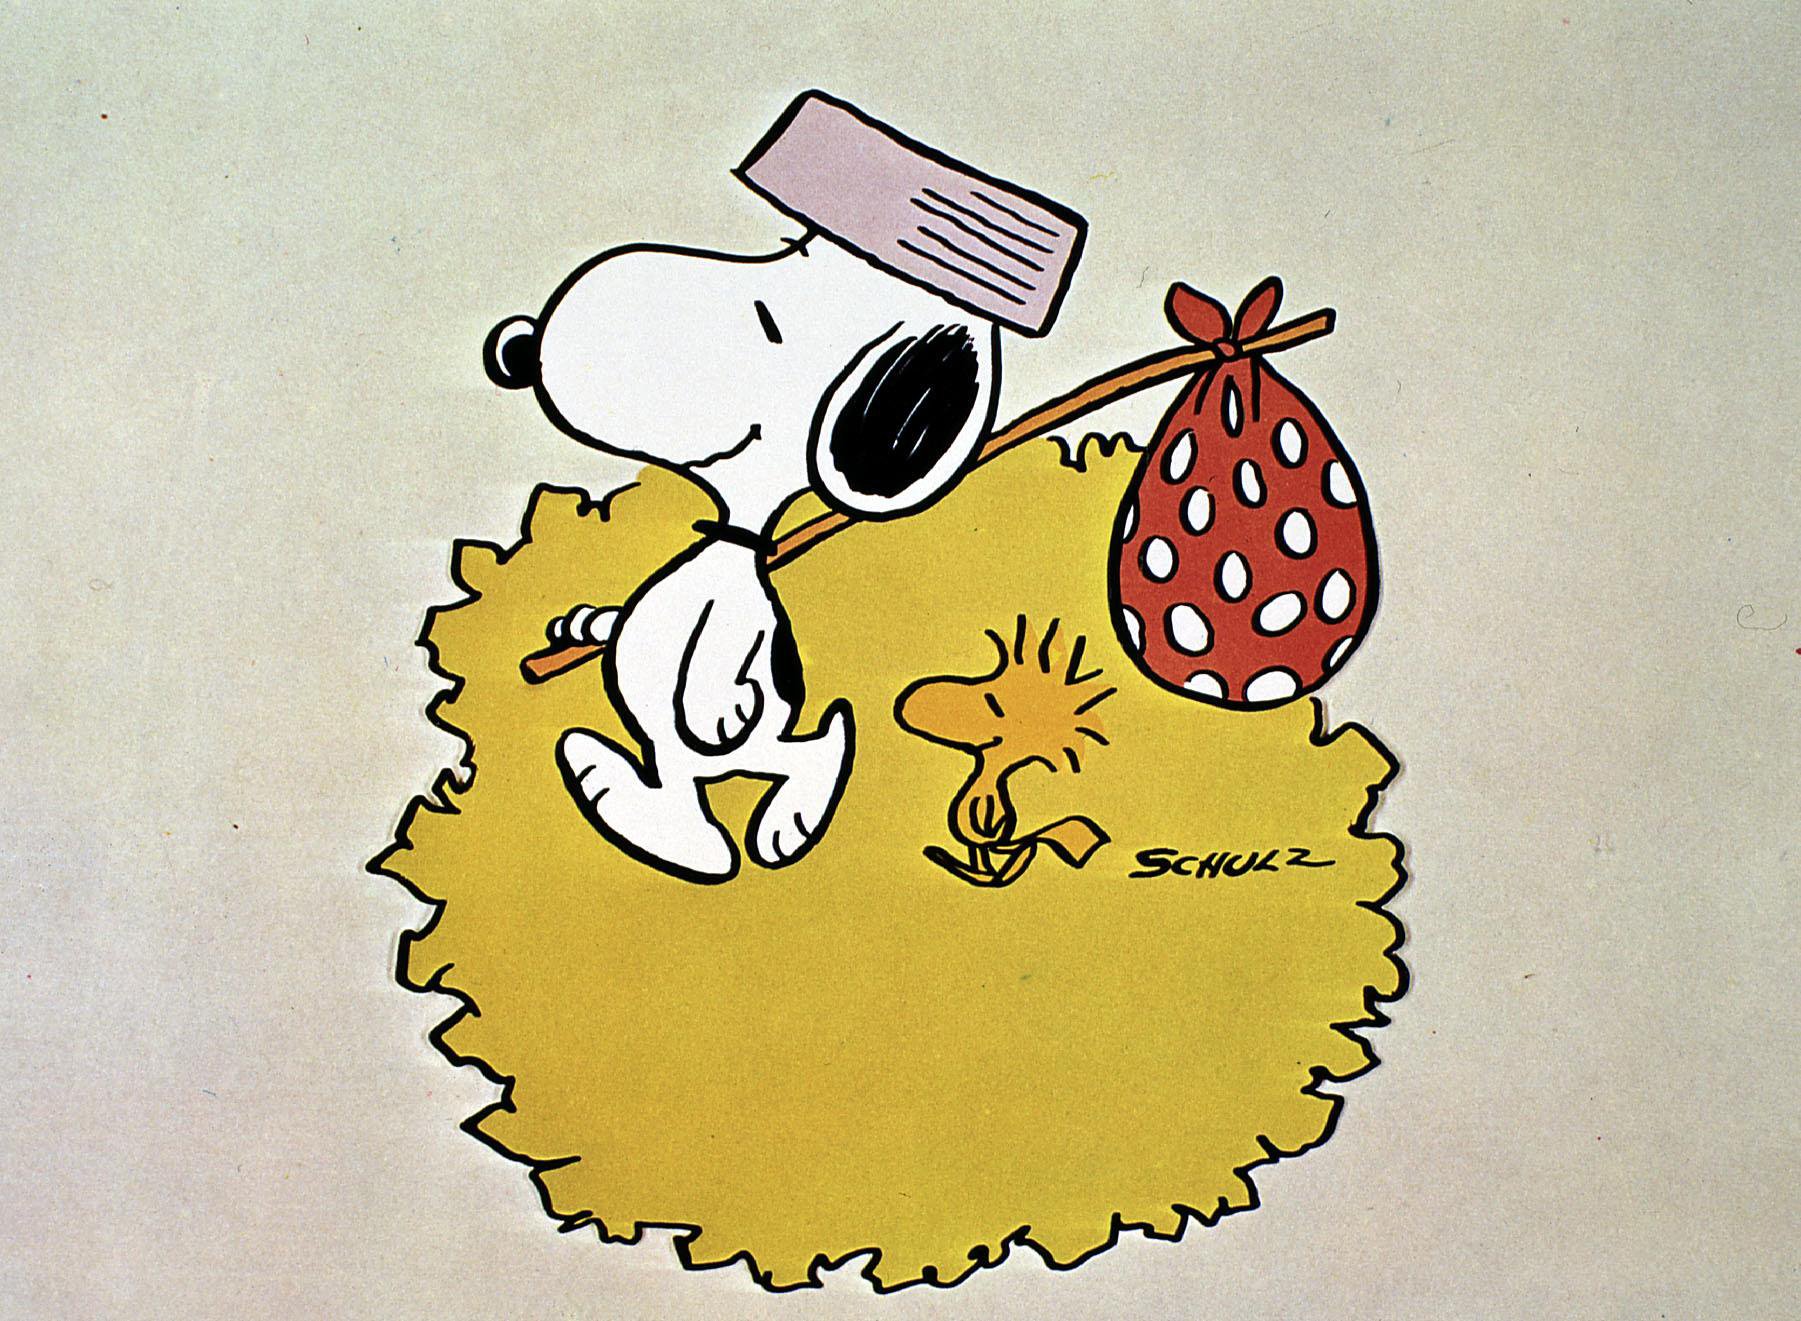 Snoopy and Woodstock travel with a bindle